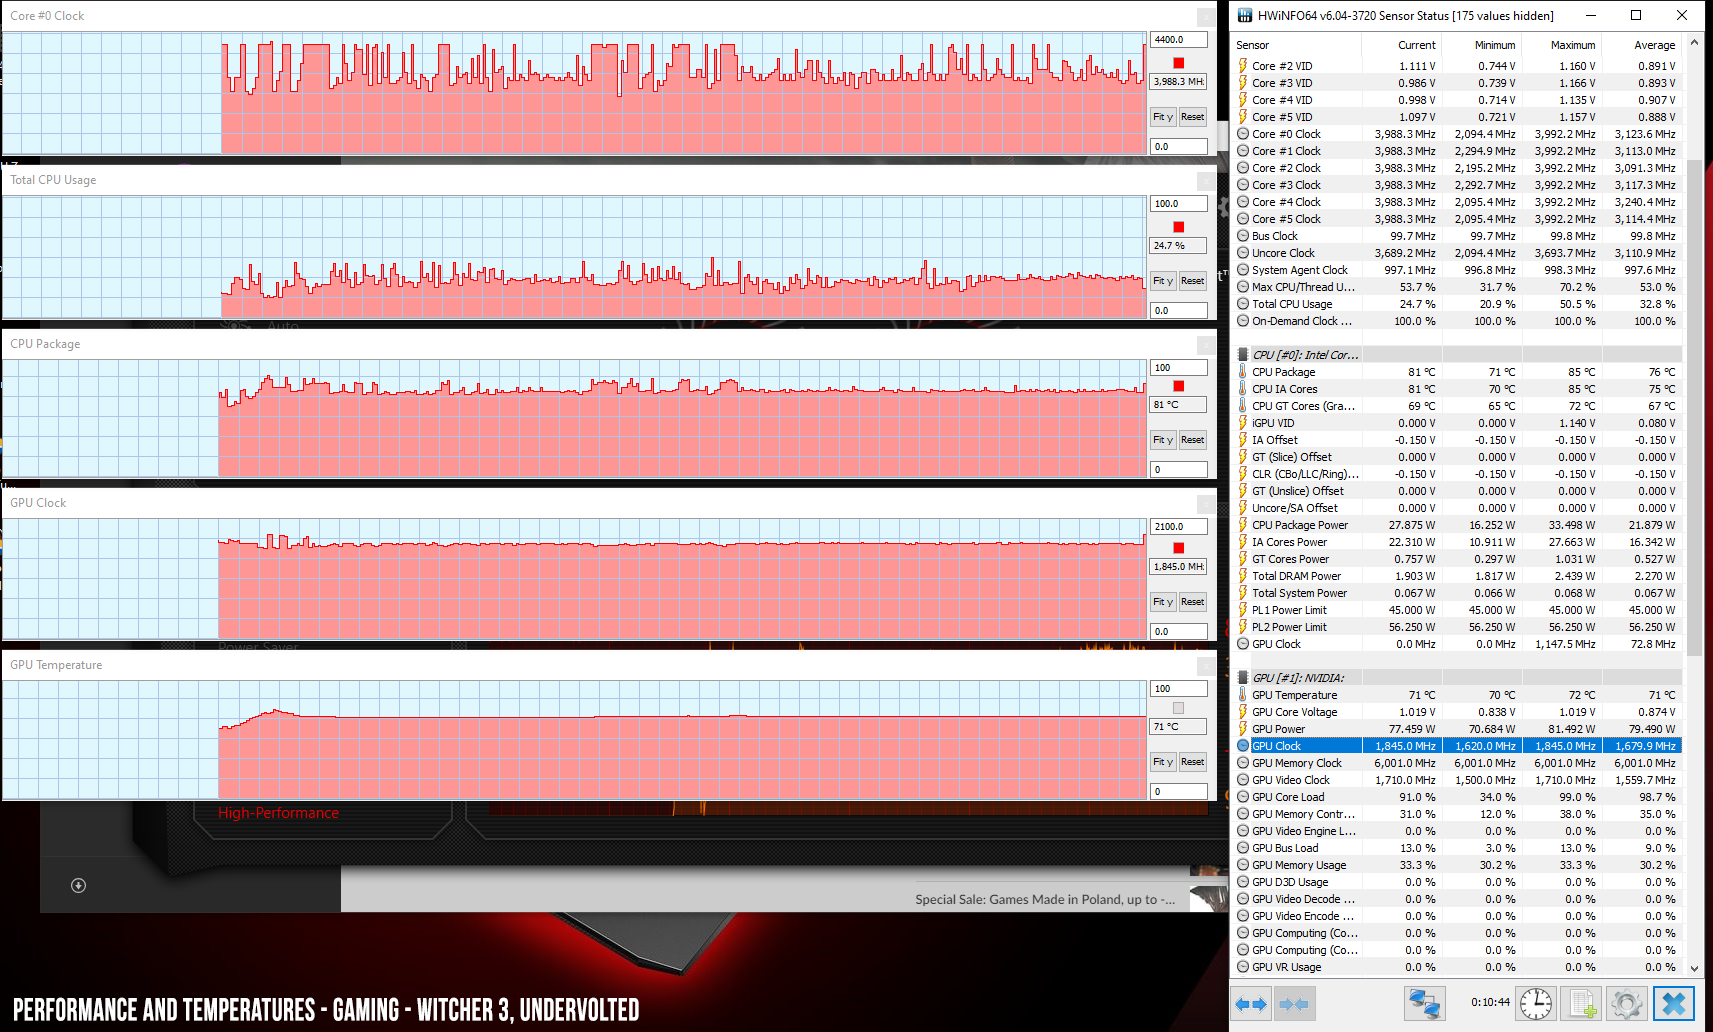 perf temps gaming witcher3 justundervolted